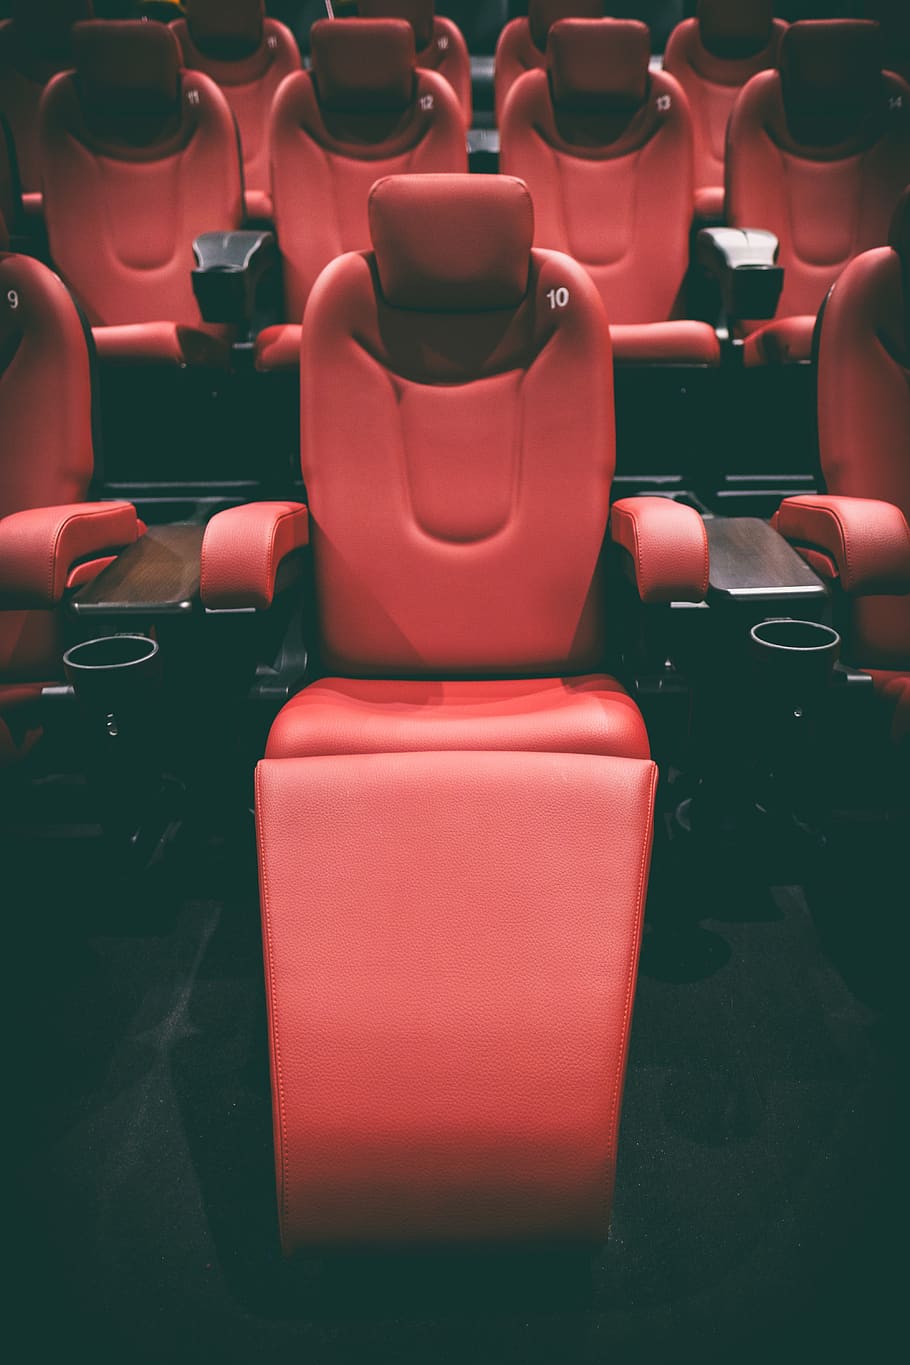 cinema, theater, movie theater, sit, chair, cozy, film, seat, empty, in a row